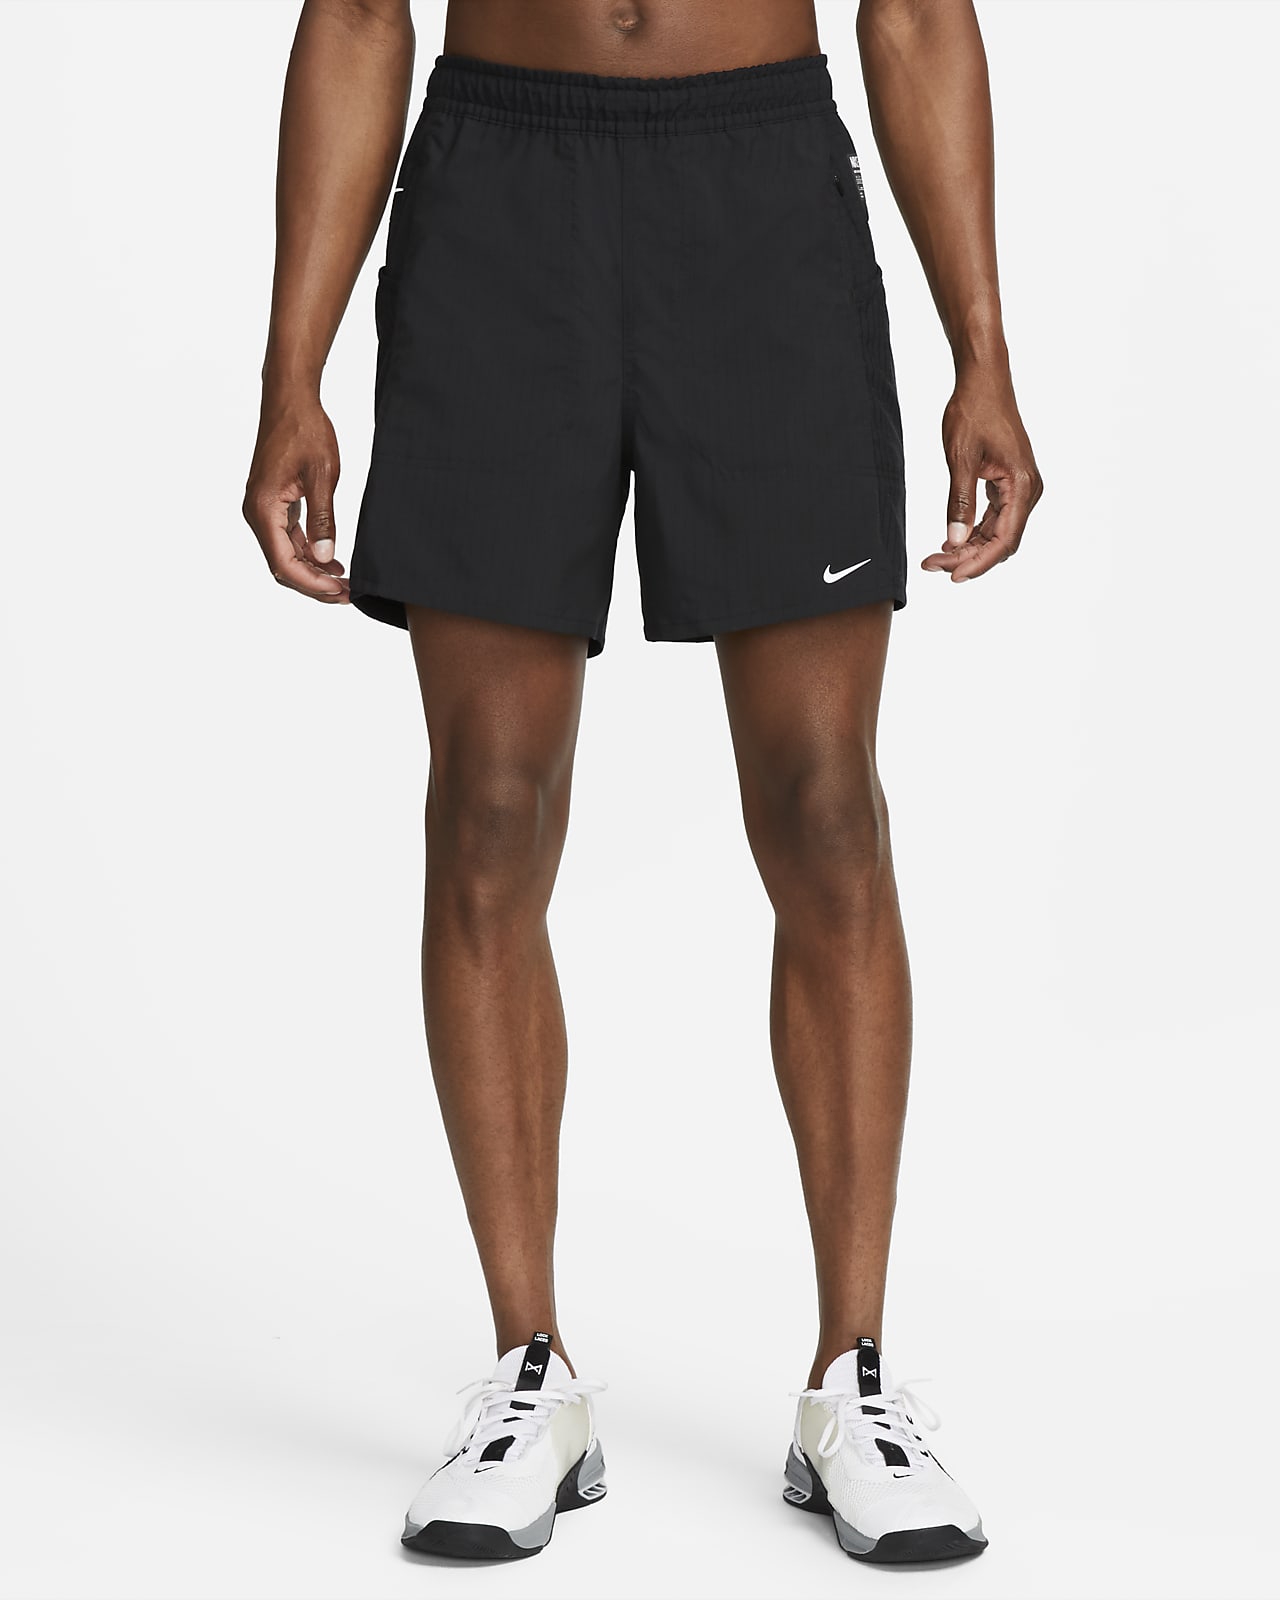 Nike Yoga Shorts Men Size Small - $20 (Upper East Side) for Sale